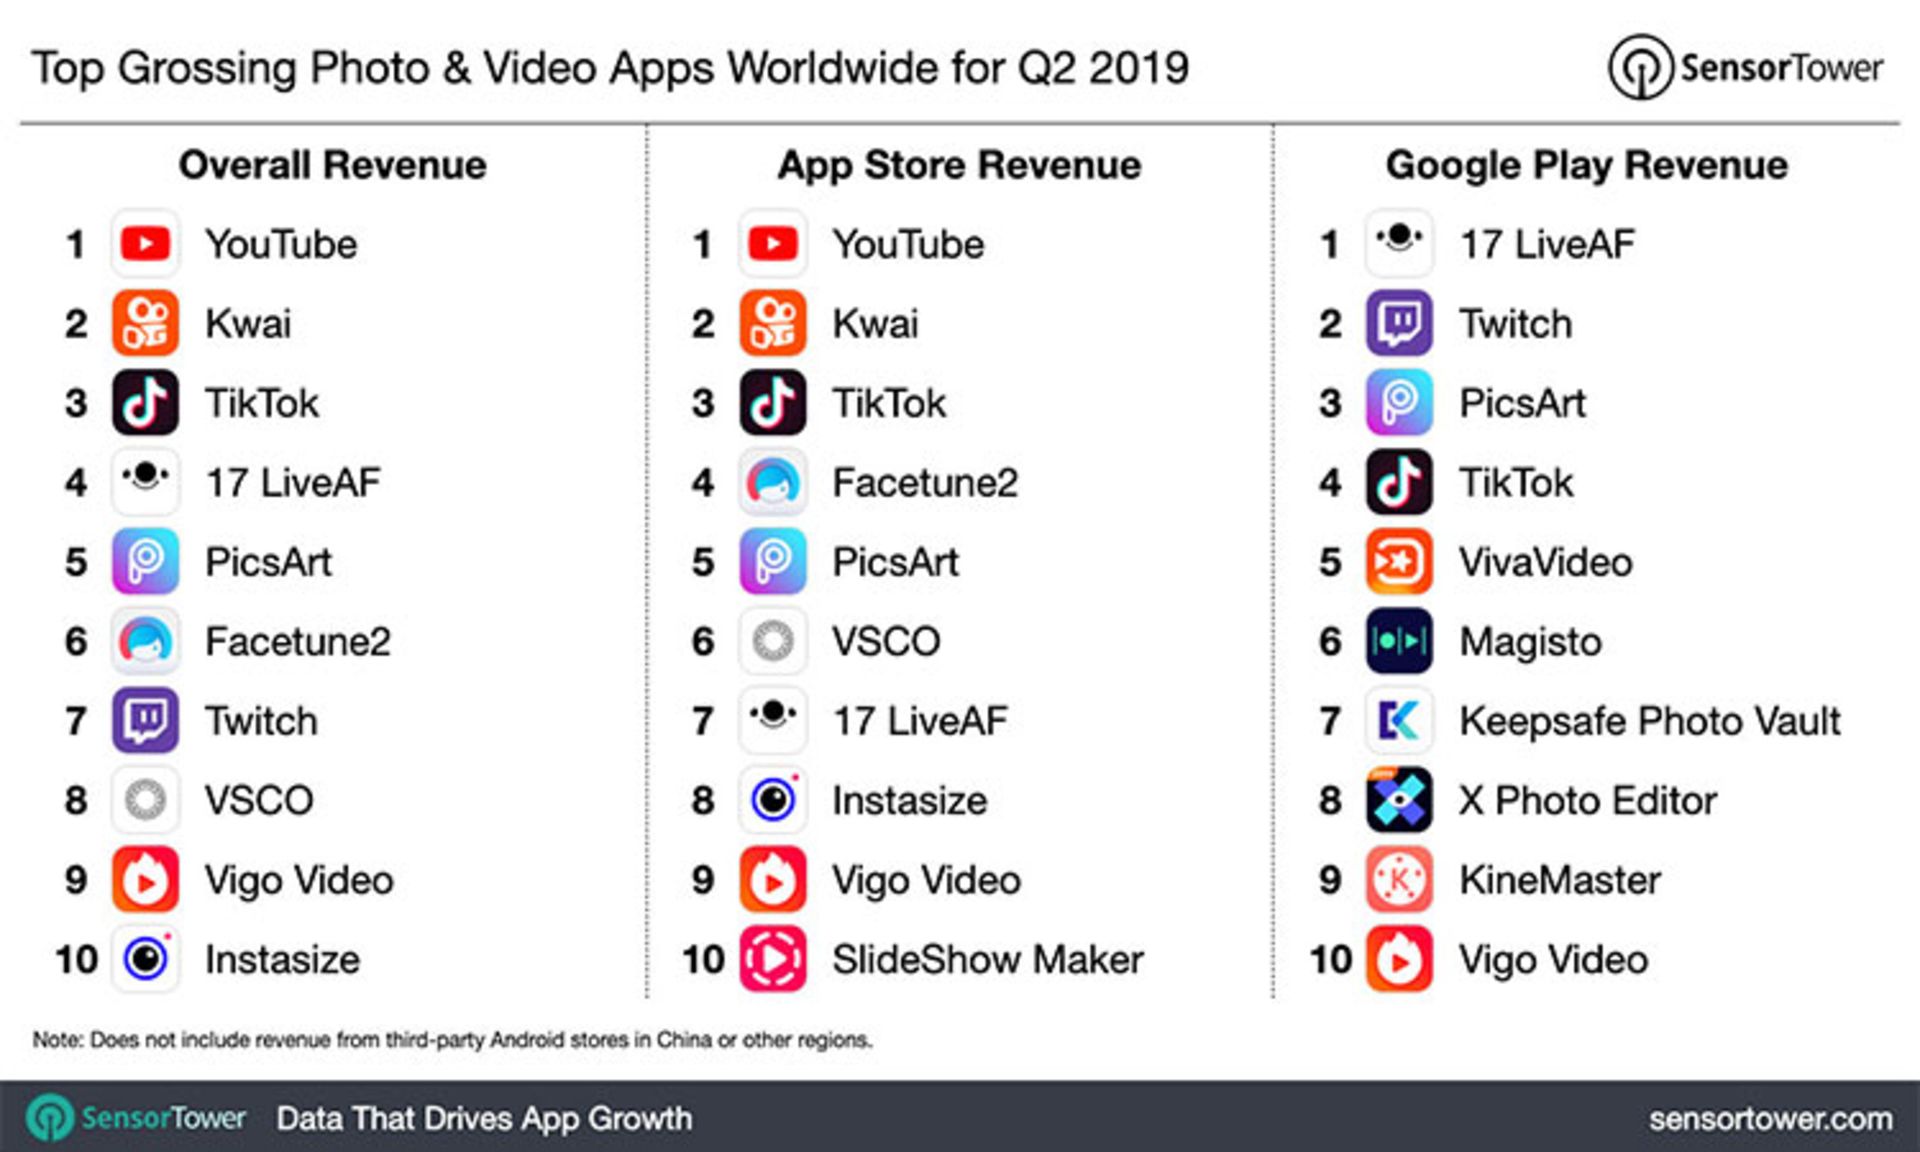 apps revenue for q2 2019 in photo and video category